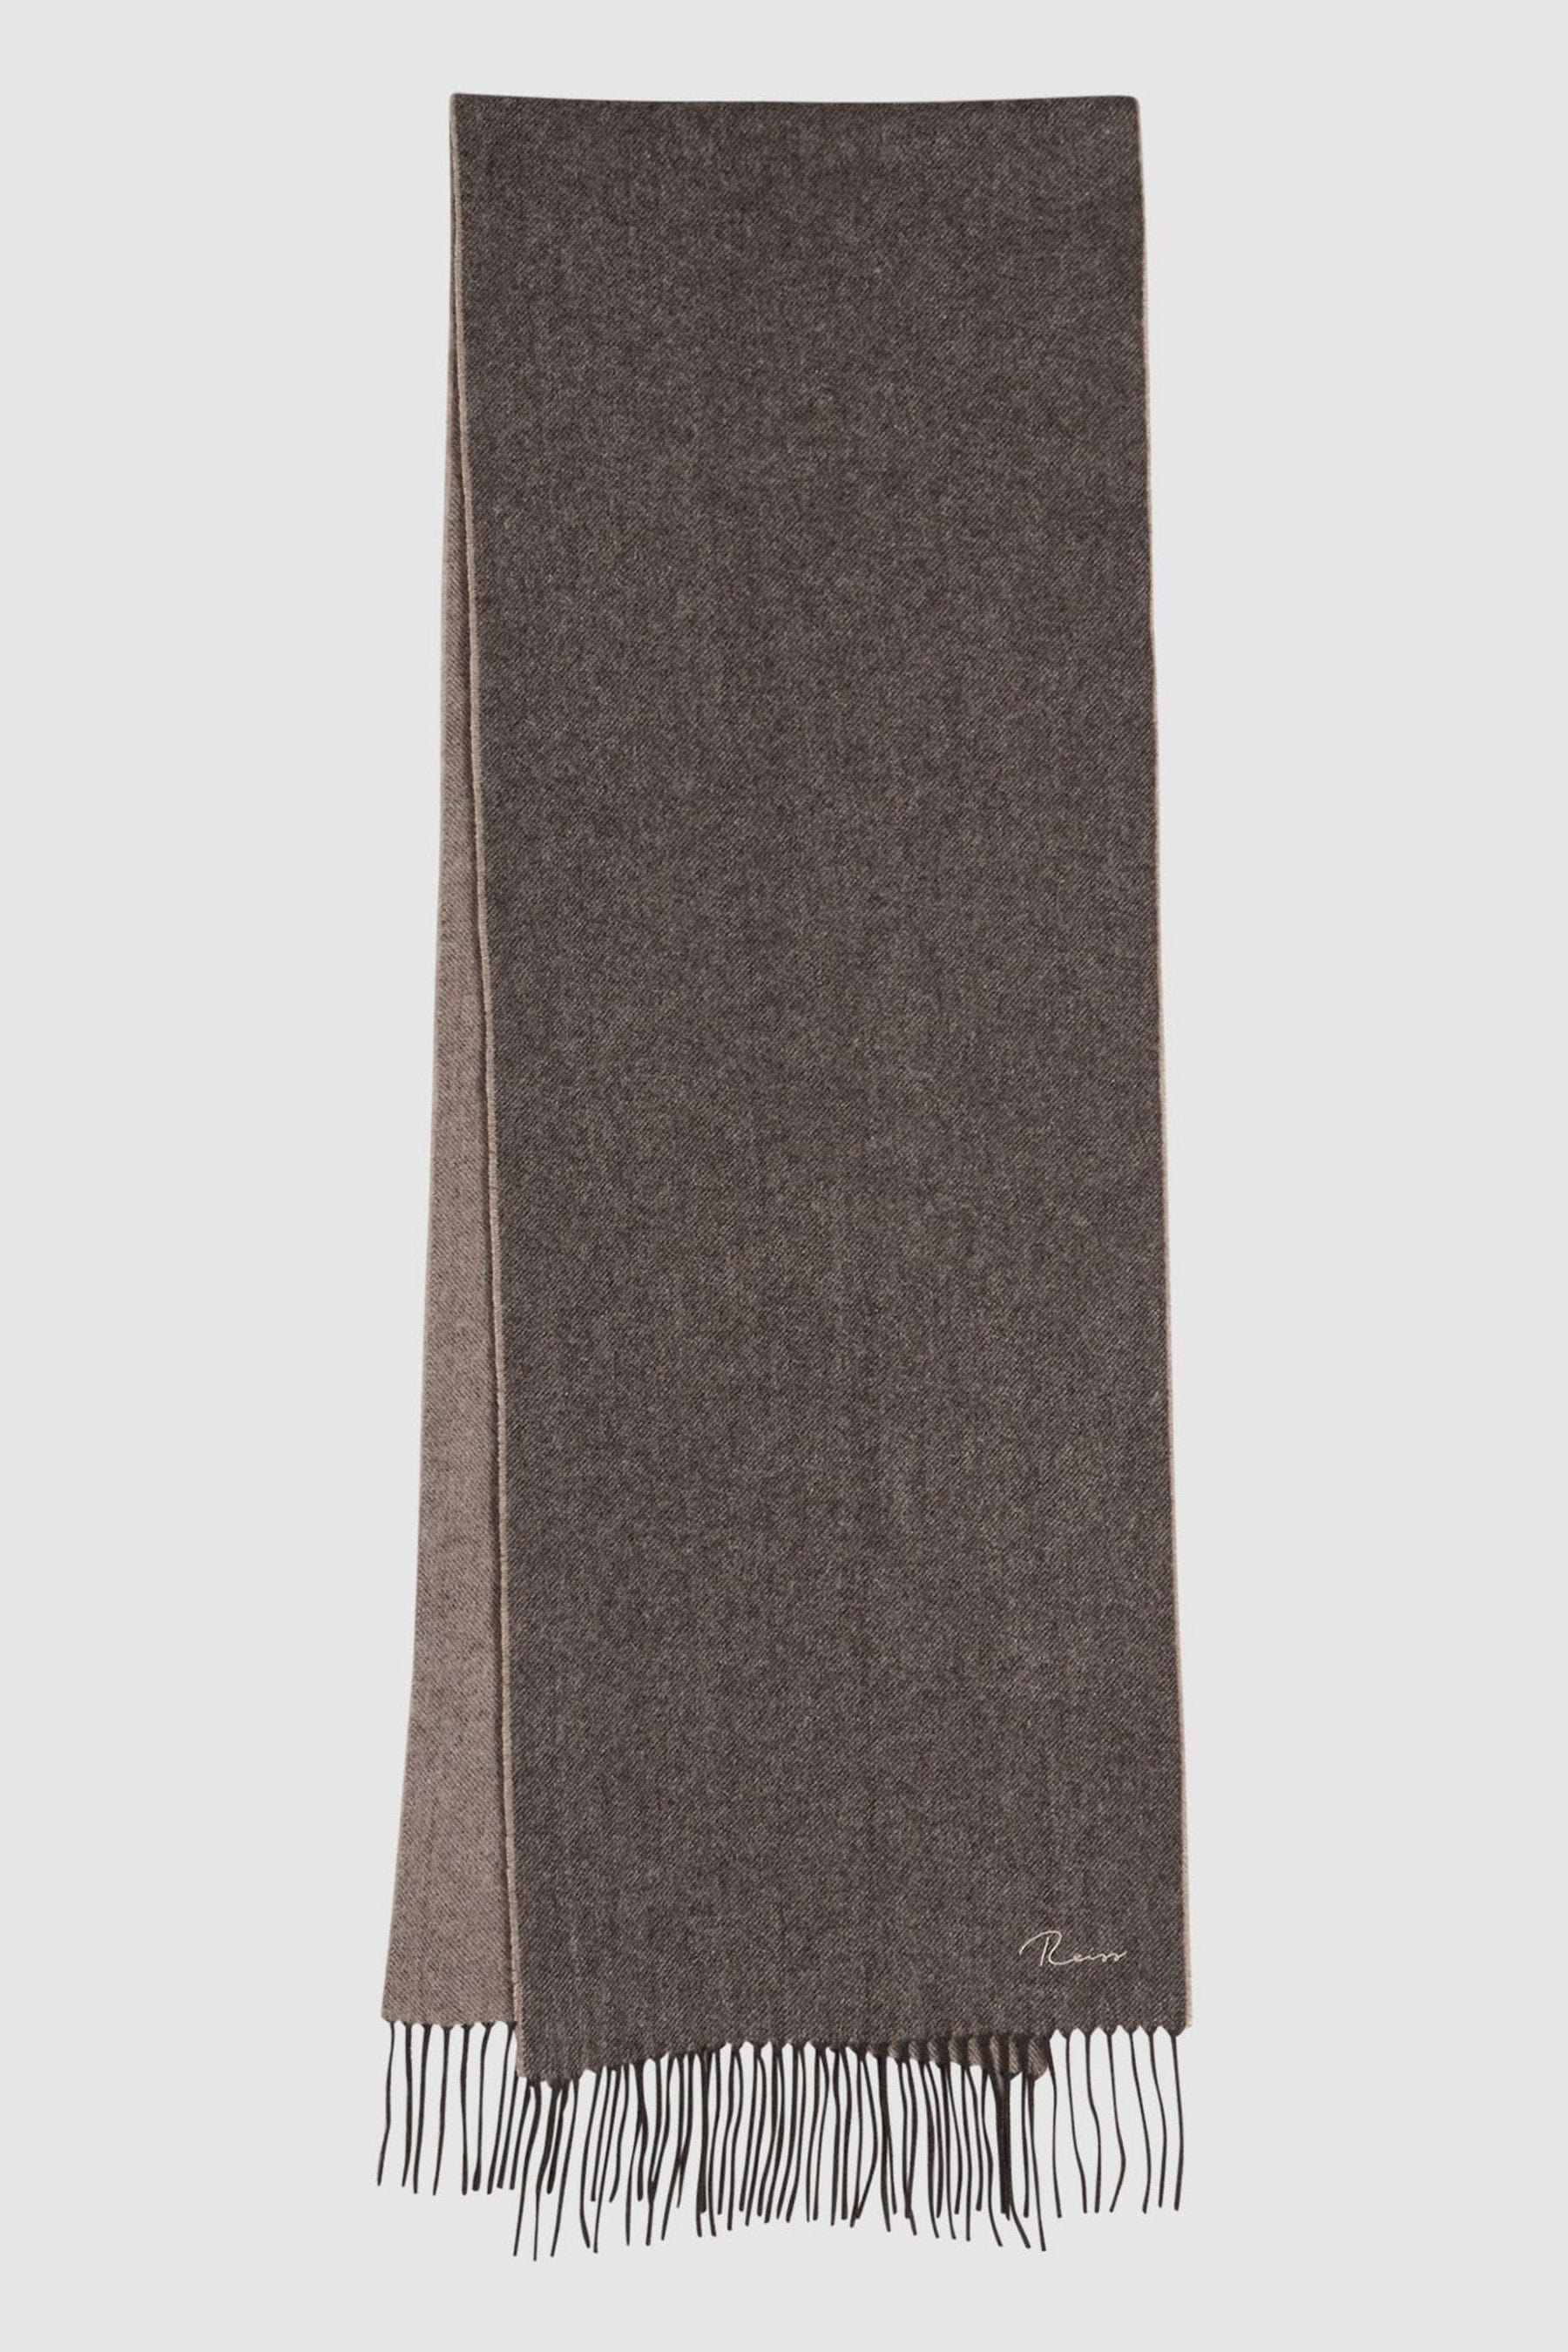 Reiss Picton - Taupe Picton Cashmere Blend Scarf, One